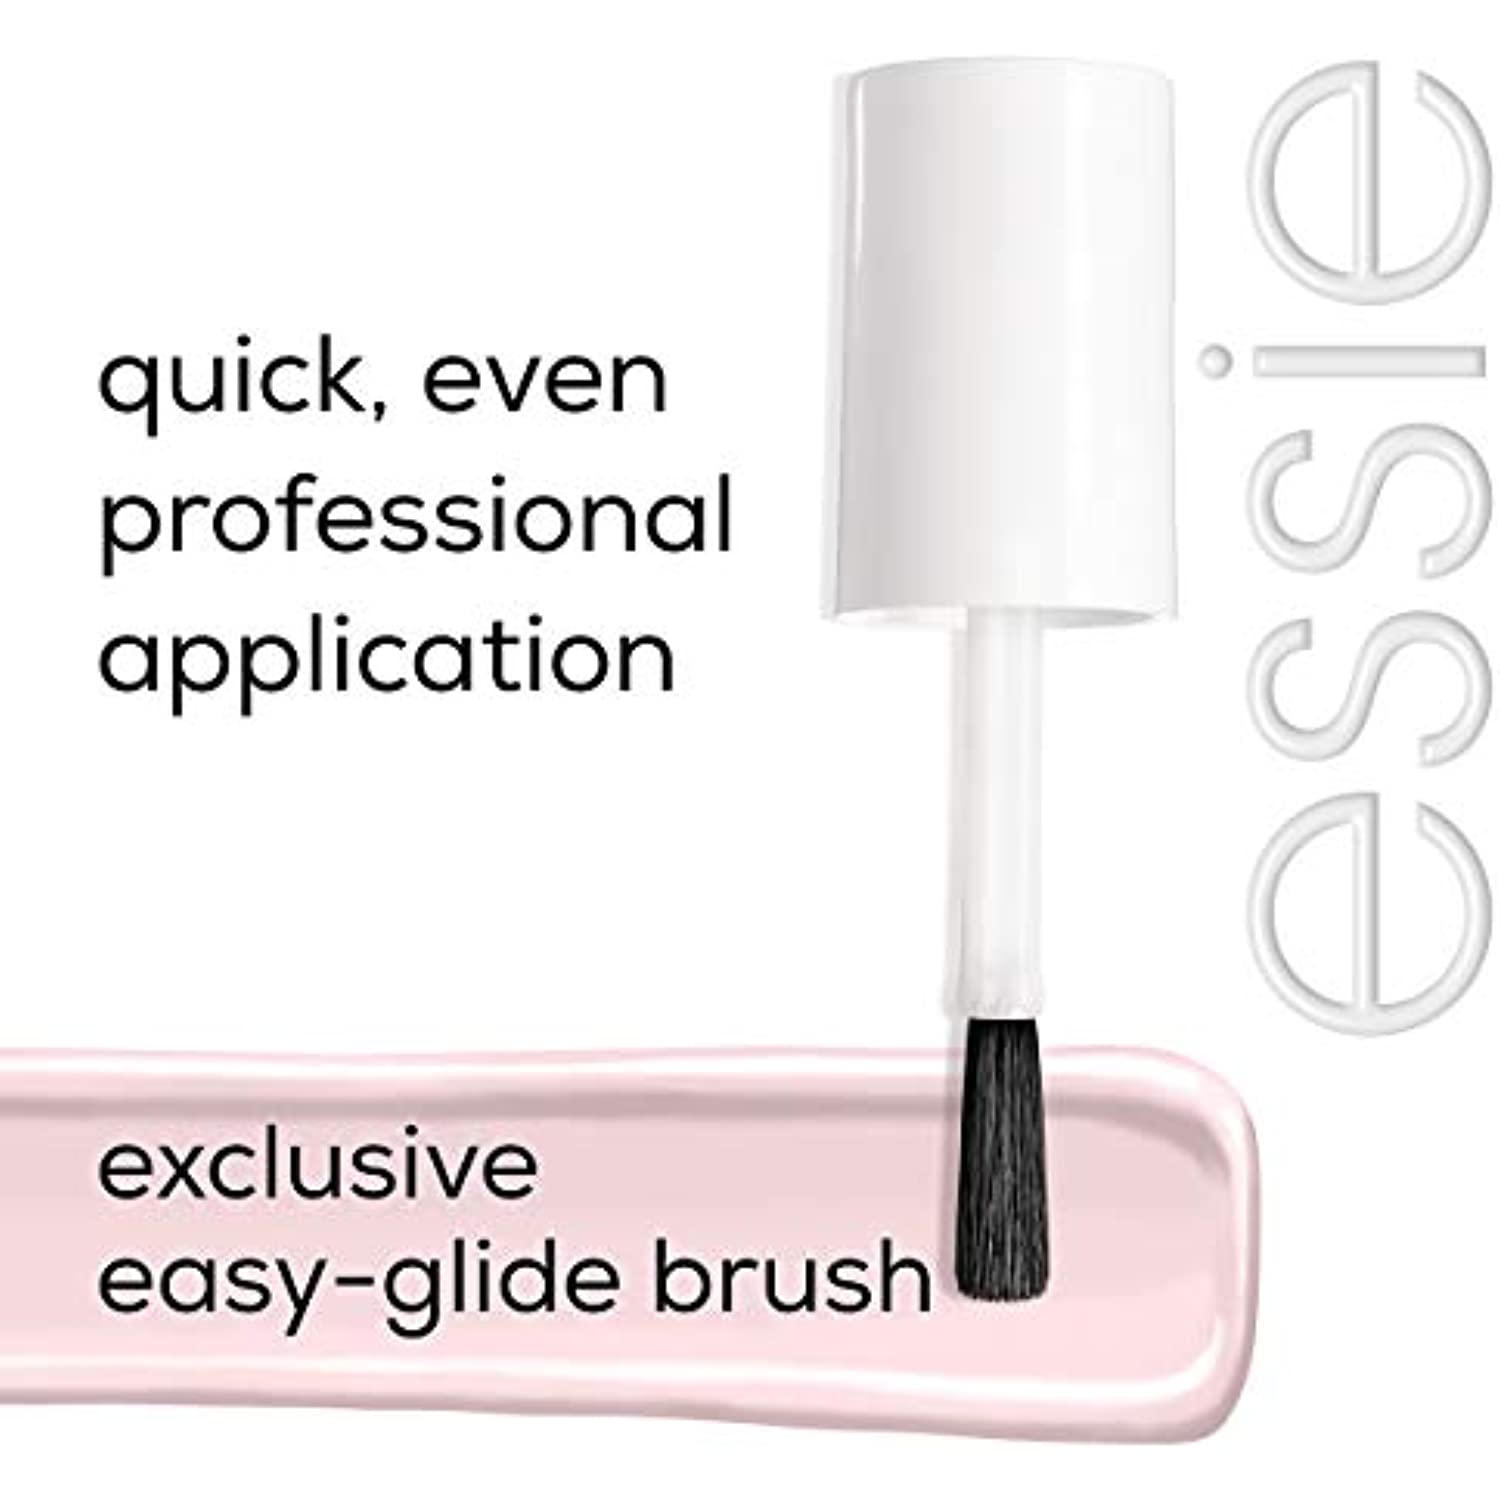 essie Nail Polish, Picked Perfect - image 5 of 7